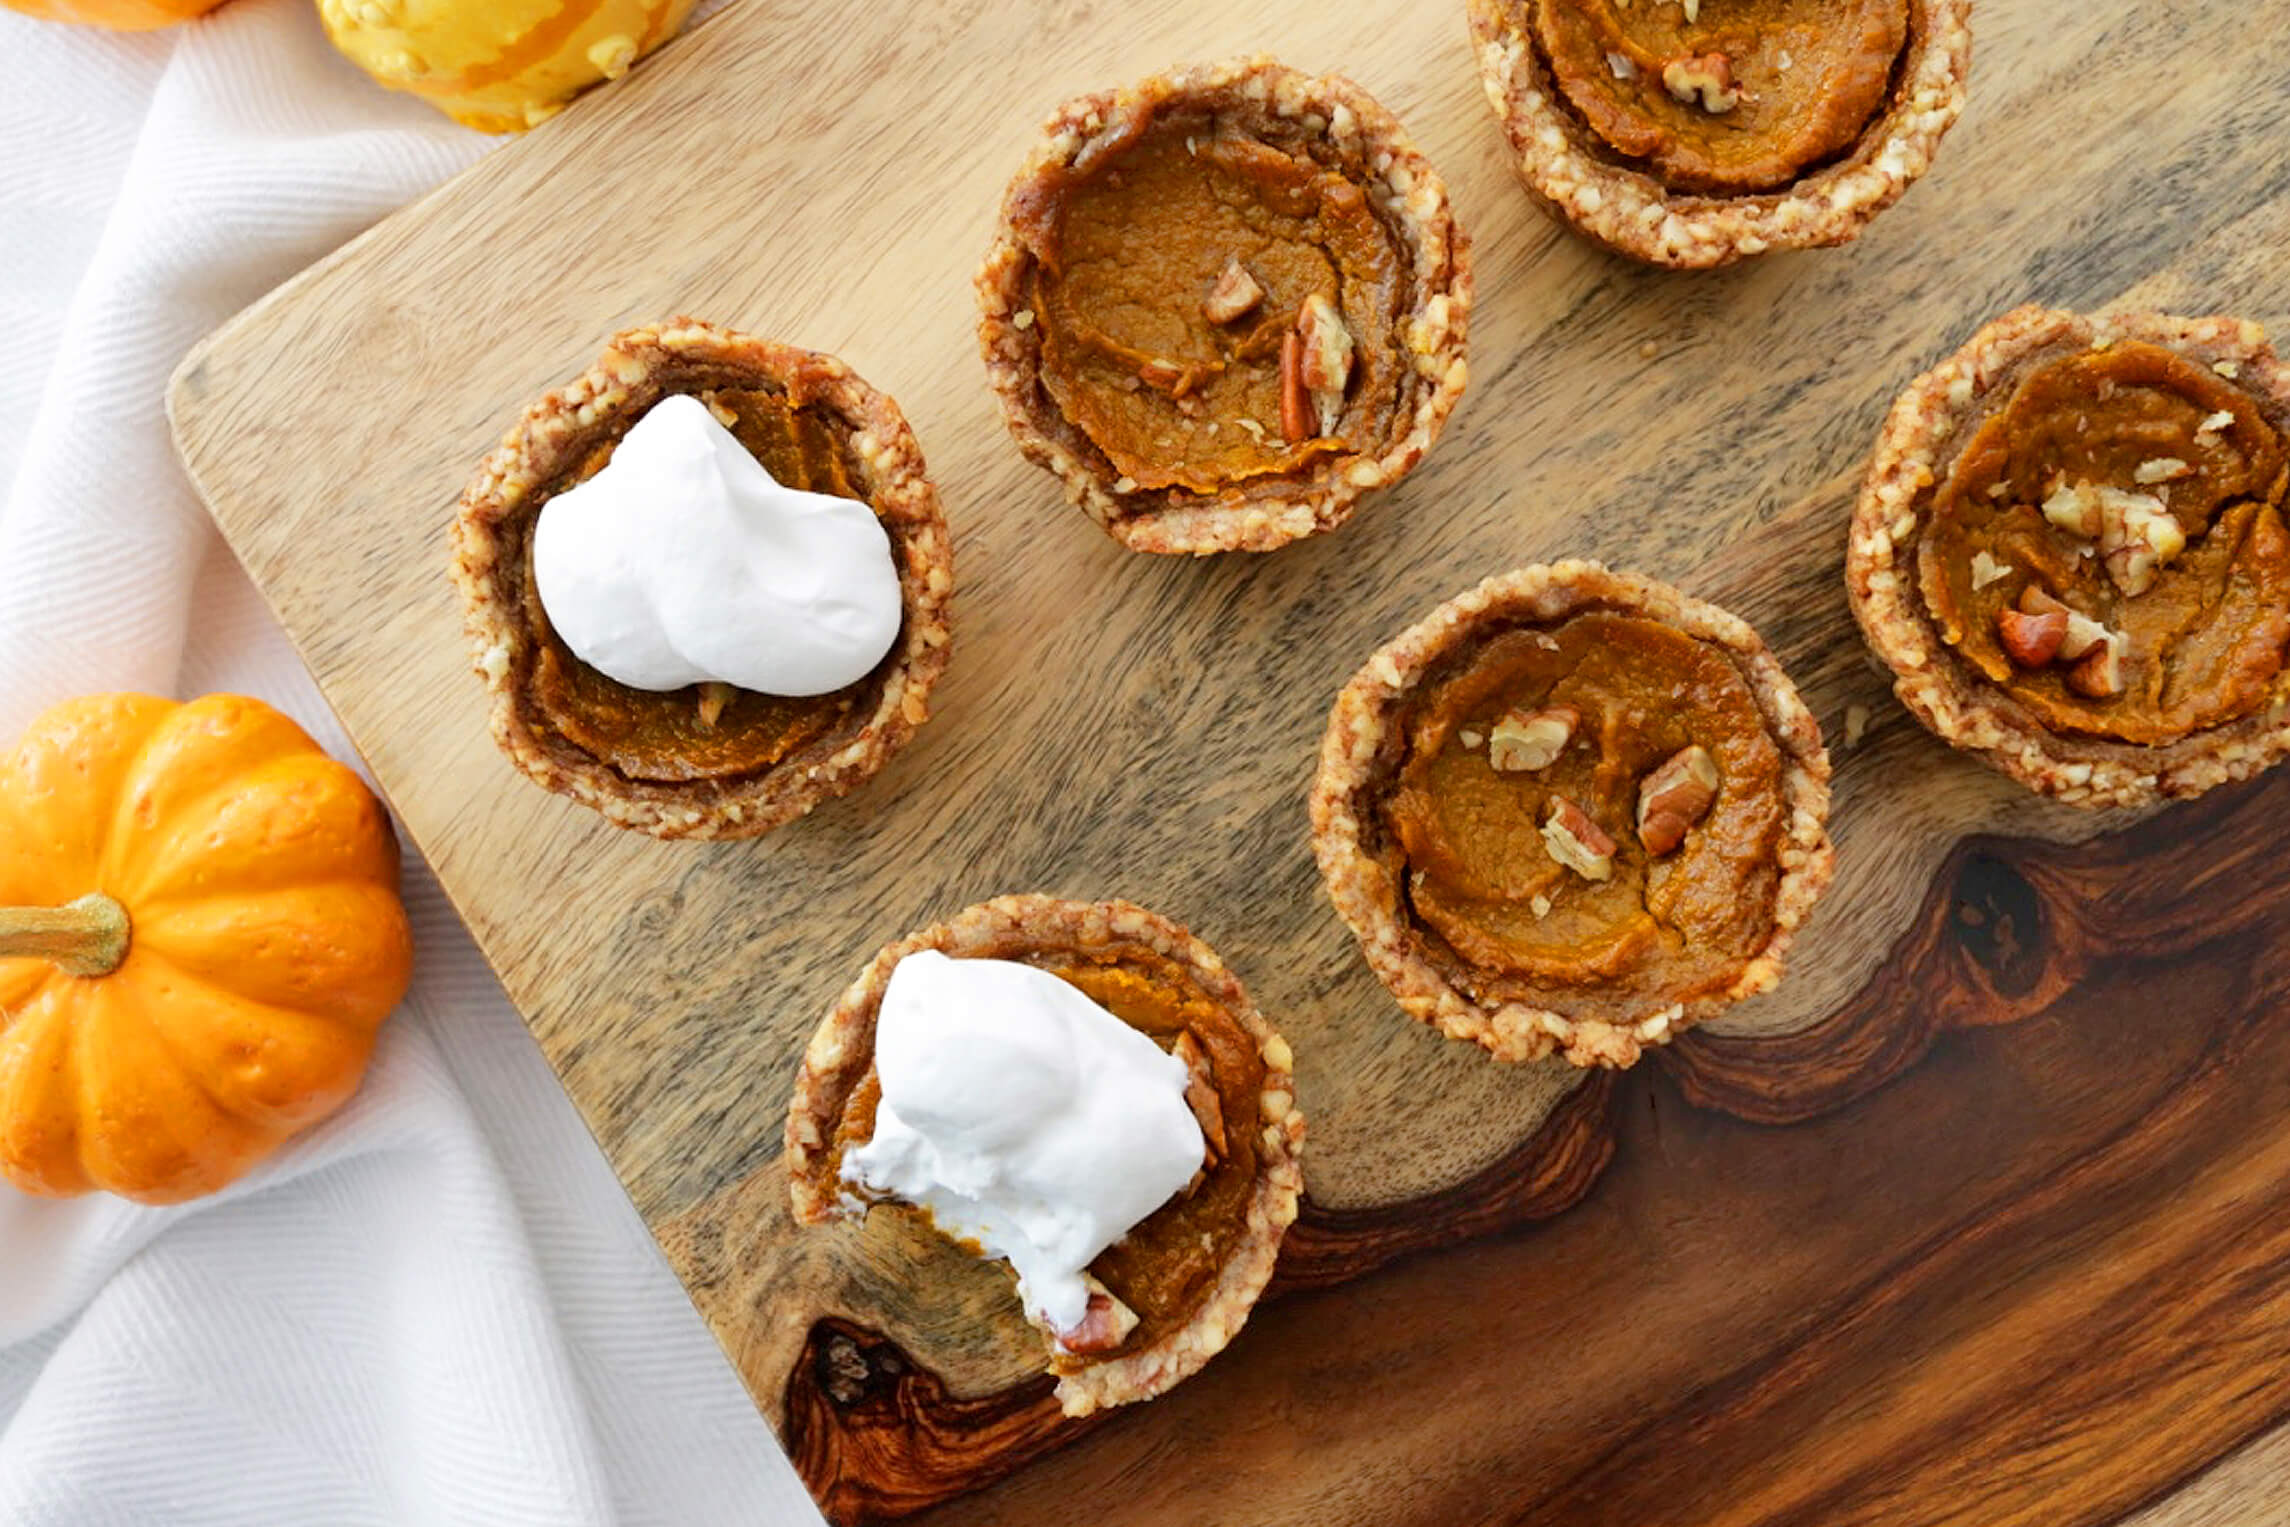 20 Healthy Fall & Thanksgiving Meal Ideas Your Clients Will Love: Pumpkin Pie Tarts with Coconut Whipped Cream